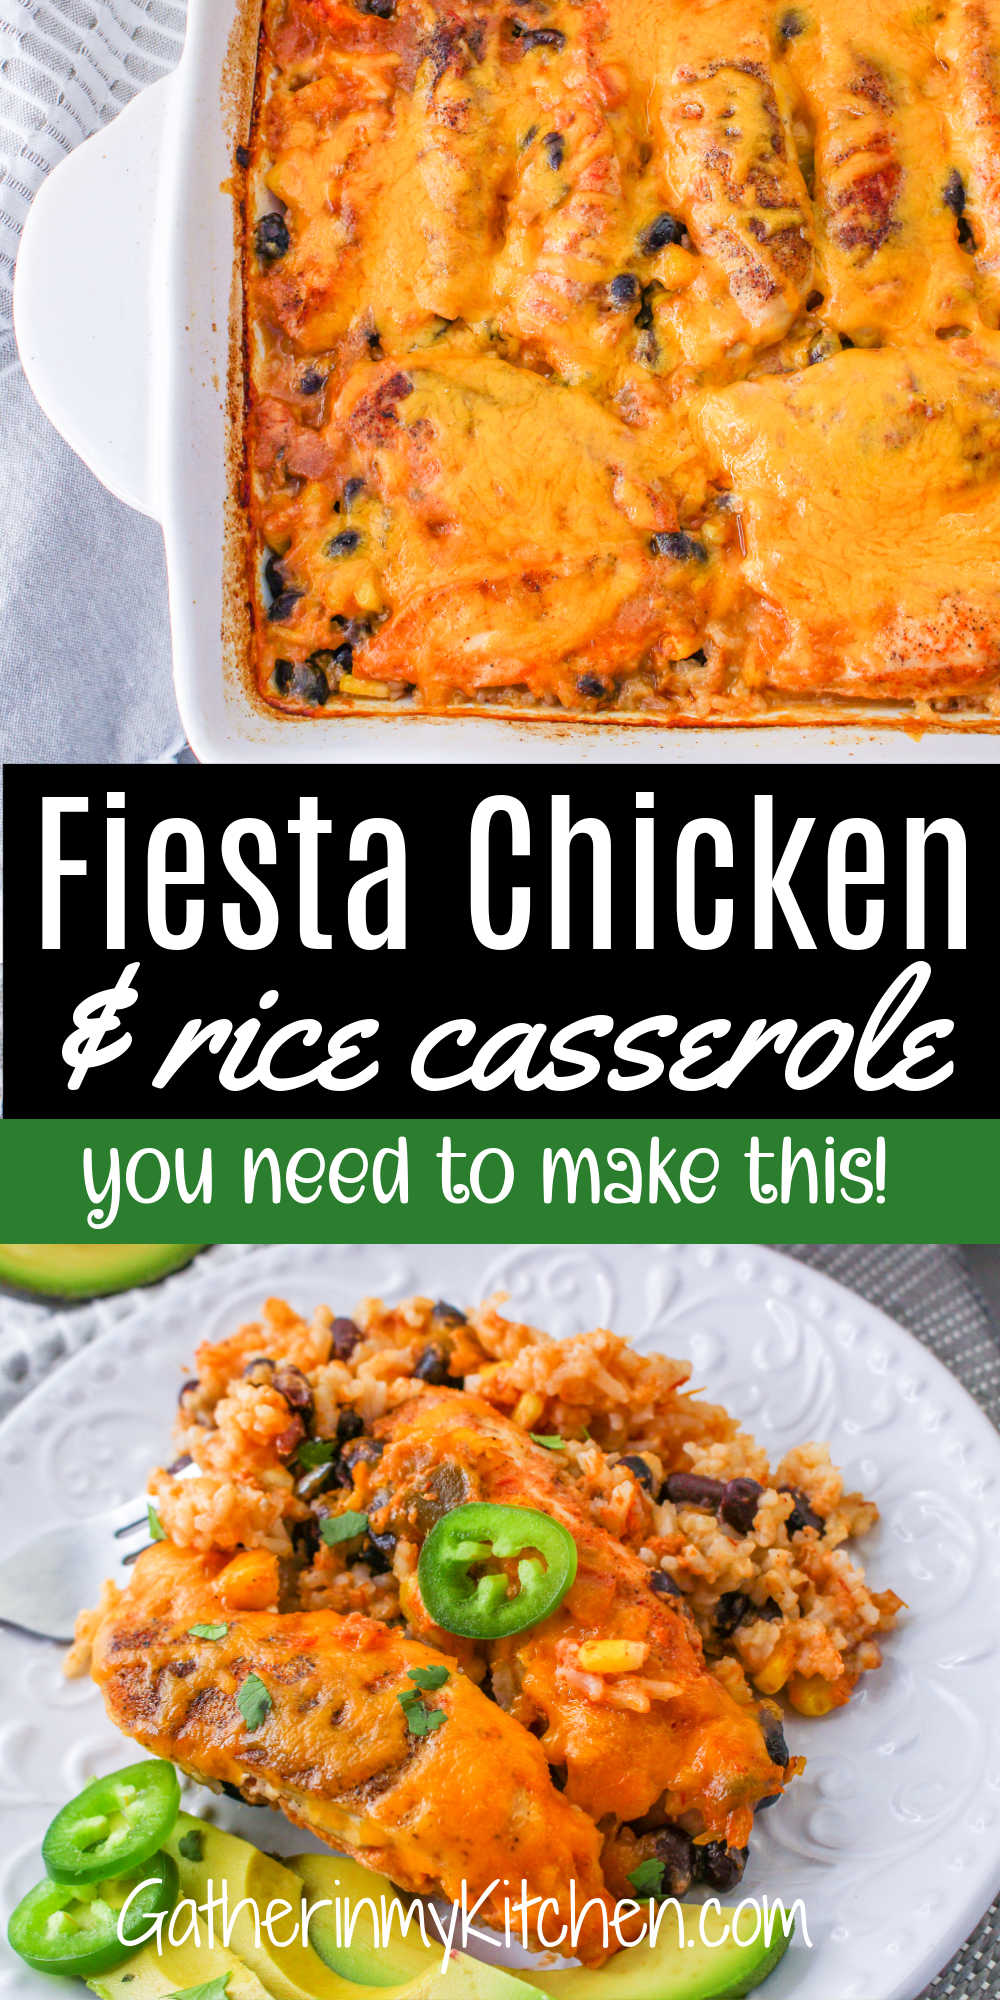 Pin image: top has a tray of fiesta chicken & rice casserole, middle says "Fiesta Chicken & rice casserole you need to make this!" and bottom has a serving of fiesta chicken & rice casserole on a plate with garnish on the side.